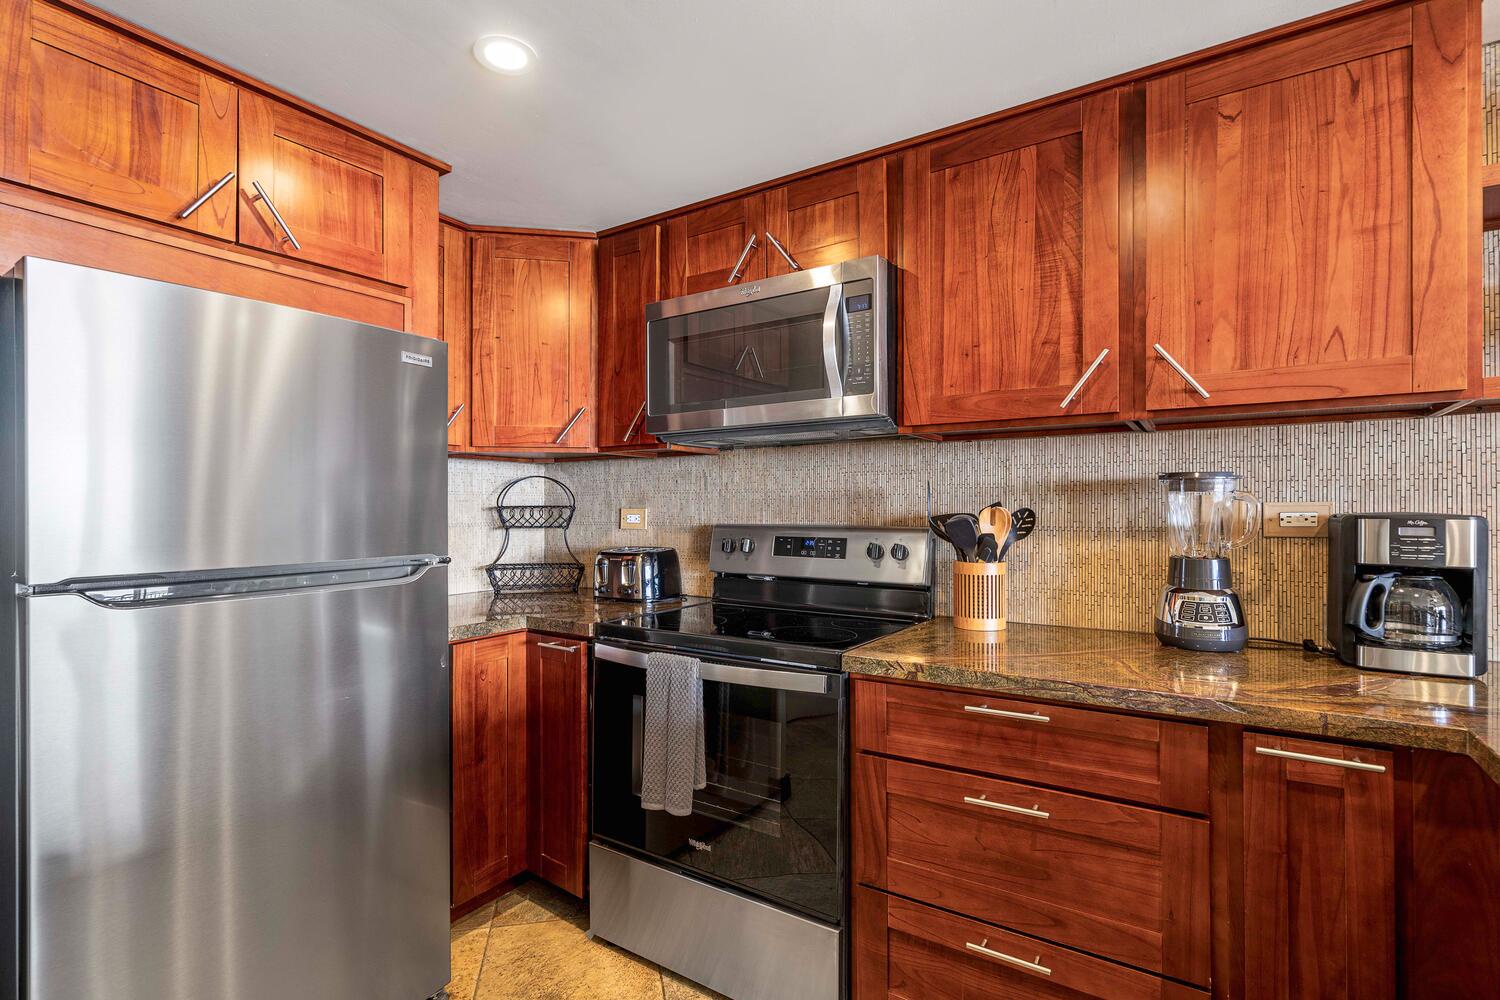 Kailua Kona Vacation Rentals, Kona Alii 302 - Equipped with top-tier appliances for a convenient meal prep.